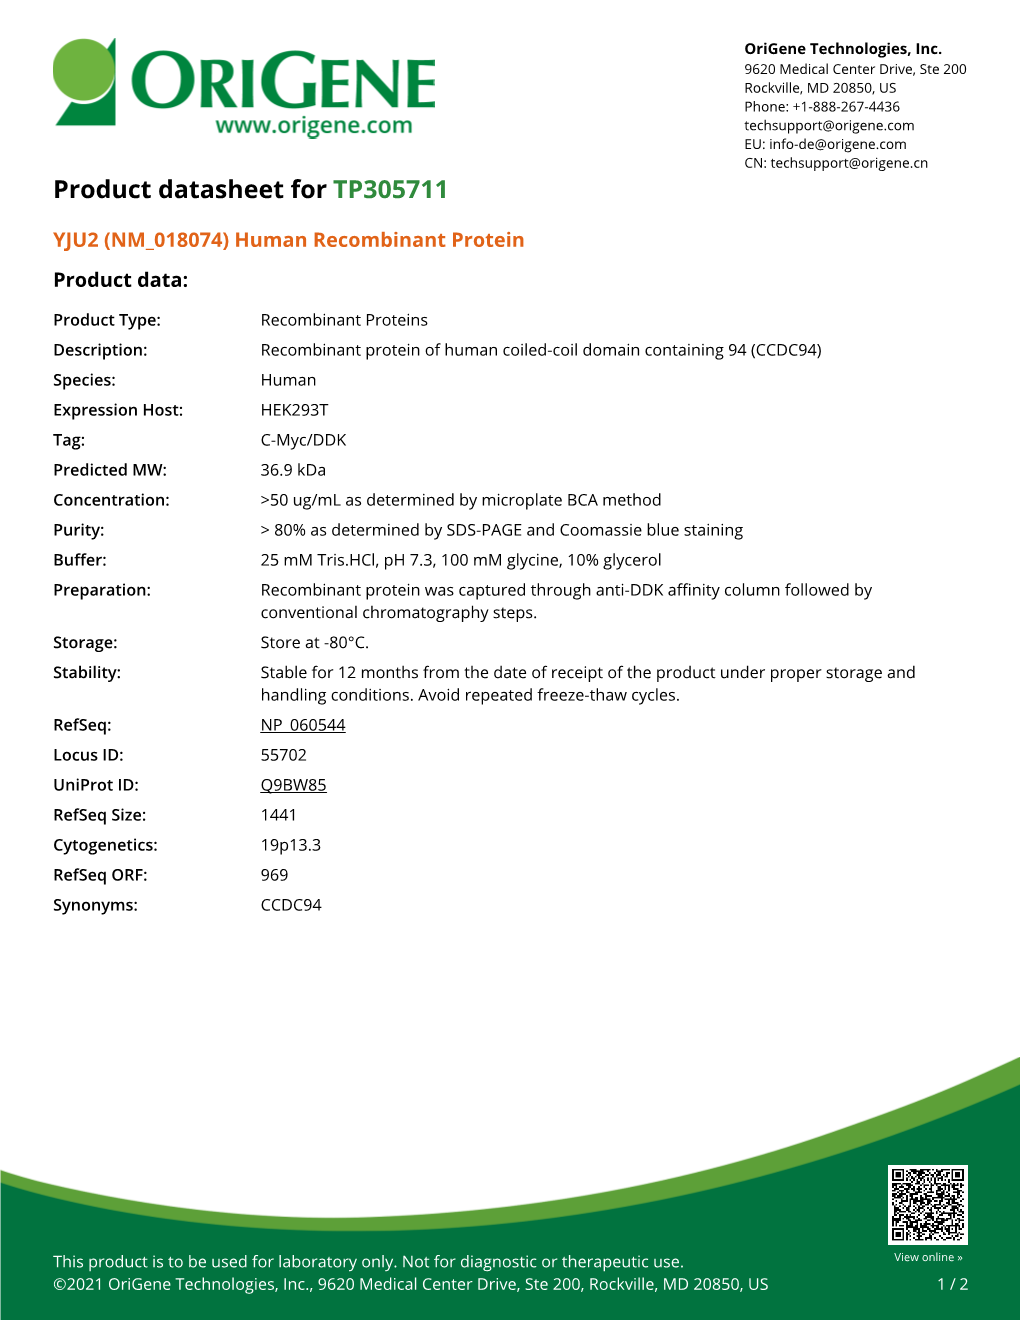 Human Recombinant Protein – TP305711